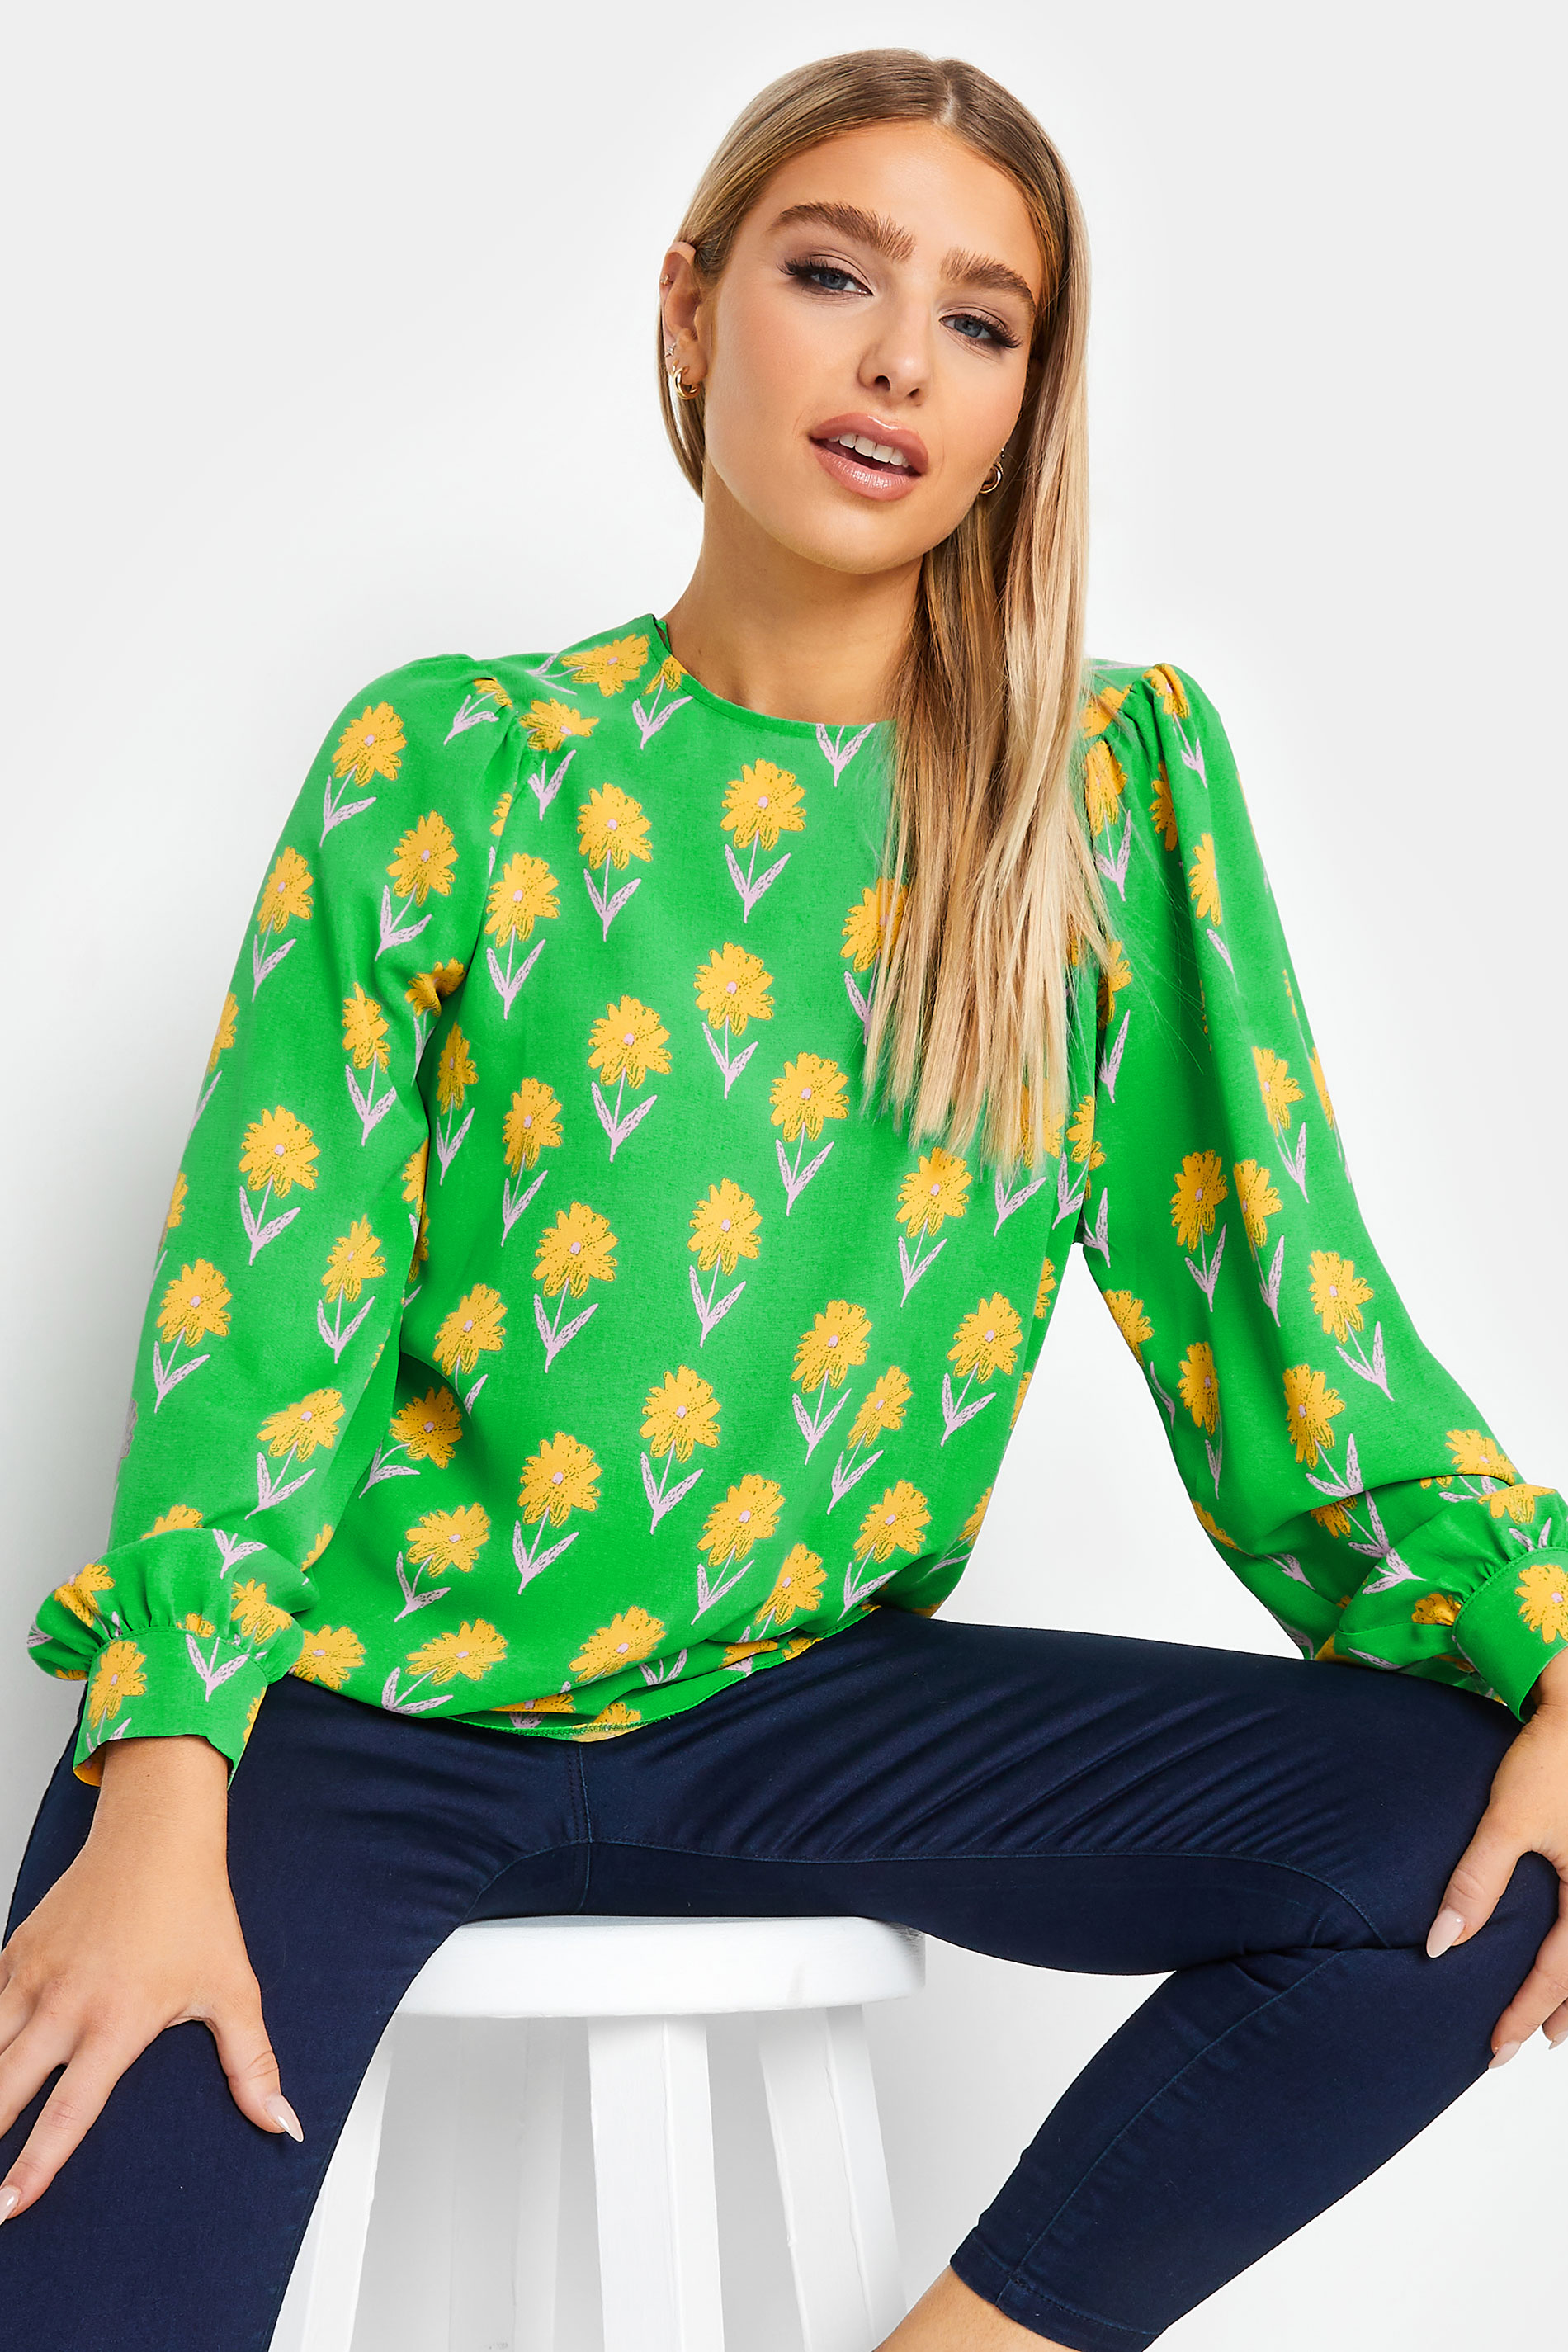 M&Co Green Floral Print Long Sleeve Blouse | M&Co 1